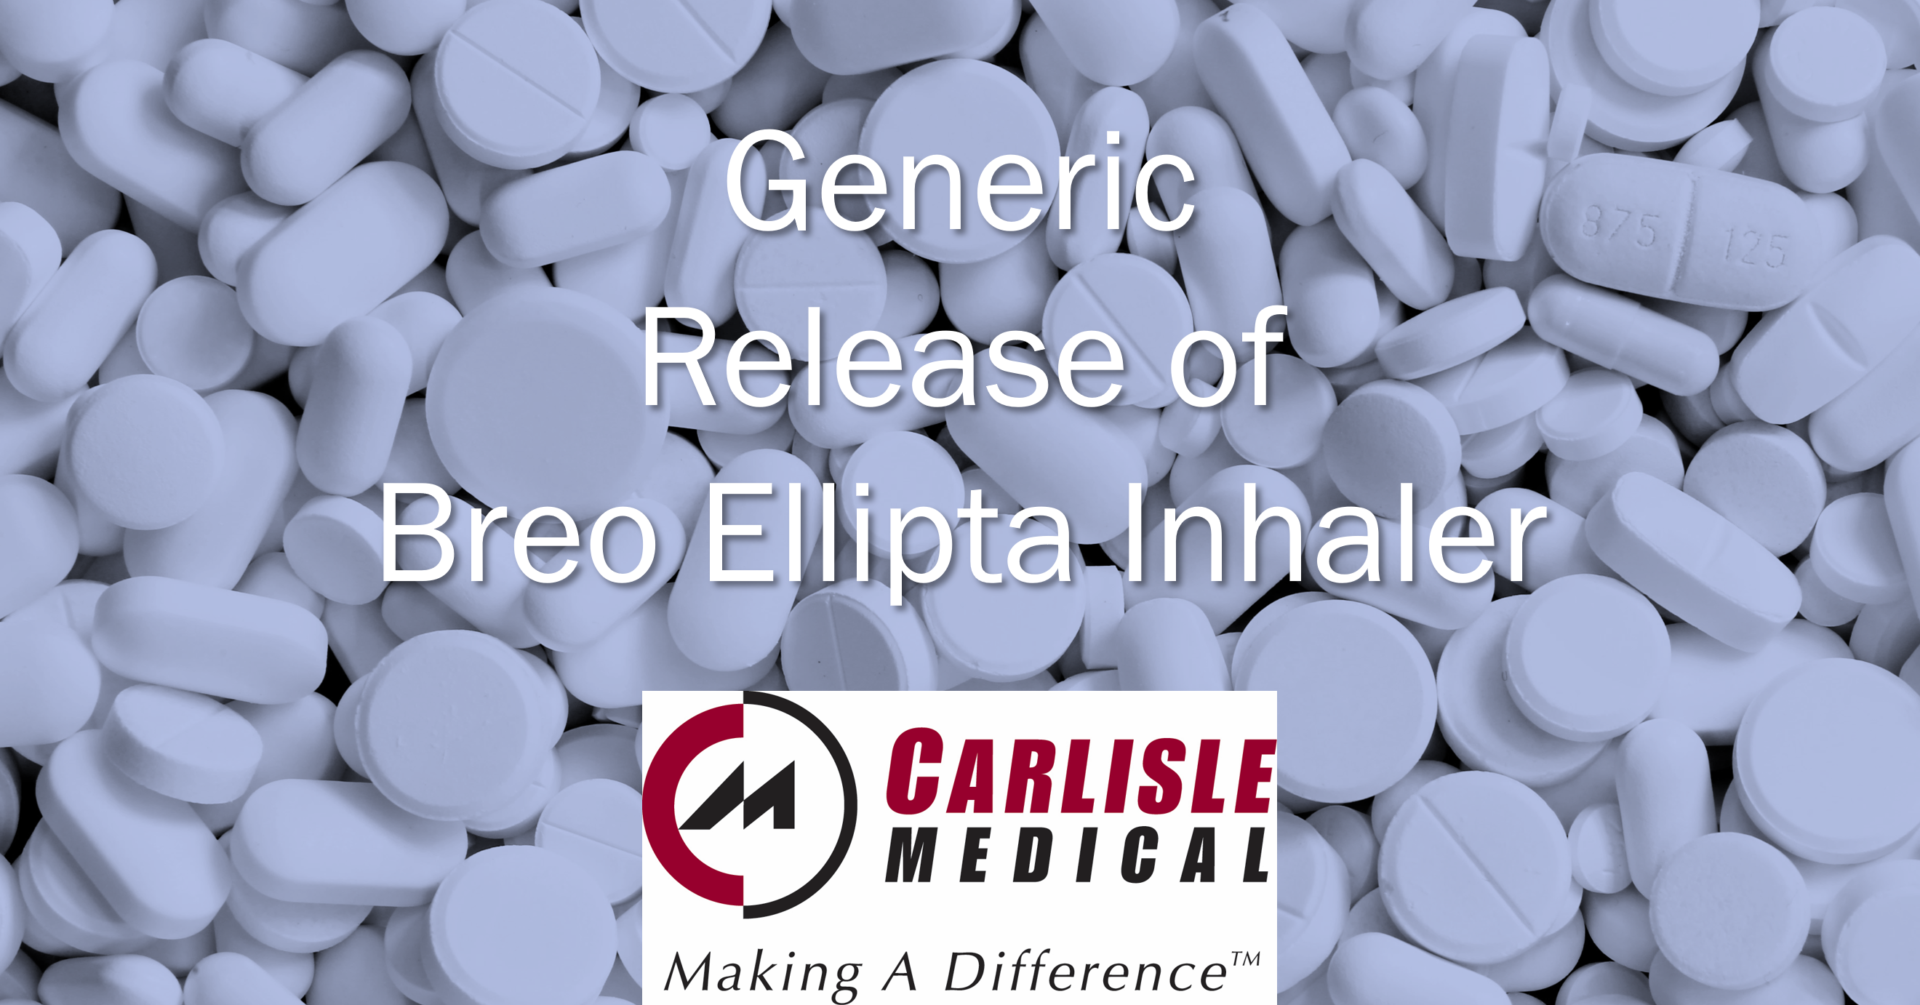 generic-release-of-breo-ellipta-inhaler-is-now-available